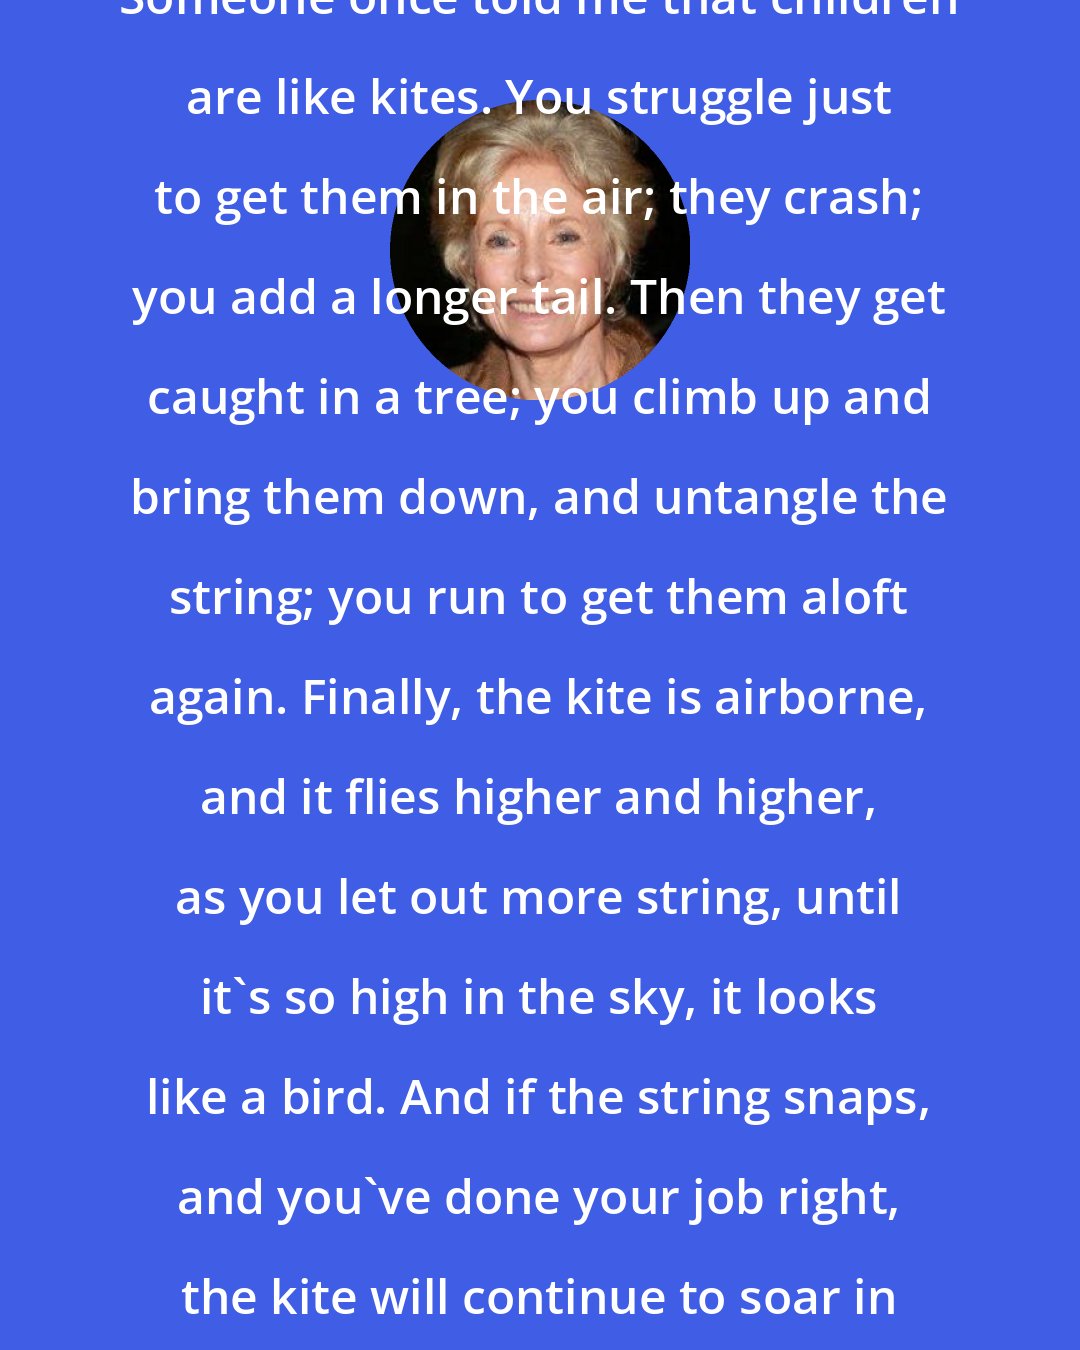 Charmian Carr: Someone once told me that children are like kites. You struggle just to get them in the air; they crash; you add a longer tail. Then they get caught in a tree; you climb up and bring them down, and untangle the string; you run to get them aloft again. Finally, the kite is airborne, and it flies higher and higher, as you let out more string, until it's so high in the sky, it looks like a bird. And if the string snaps, and you've done your job right, the kite will continue to soar in the wind, all by itself.